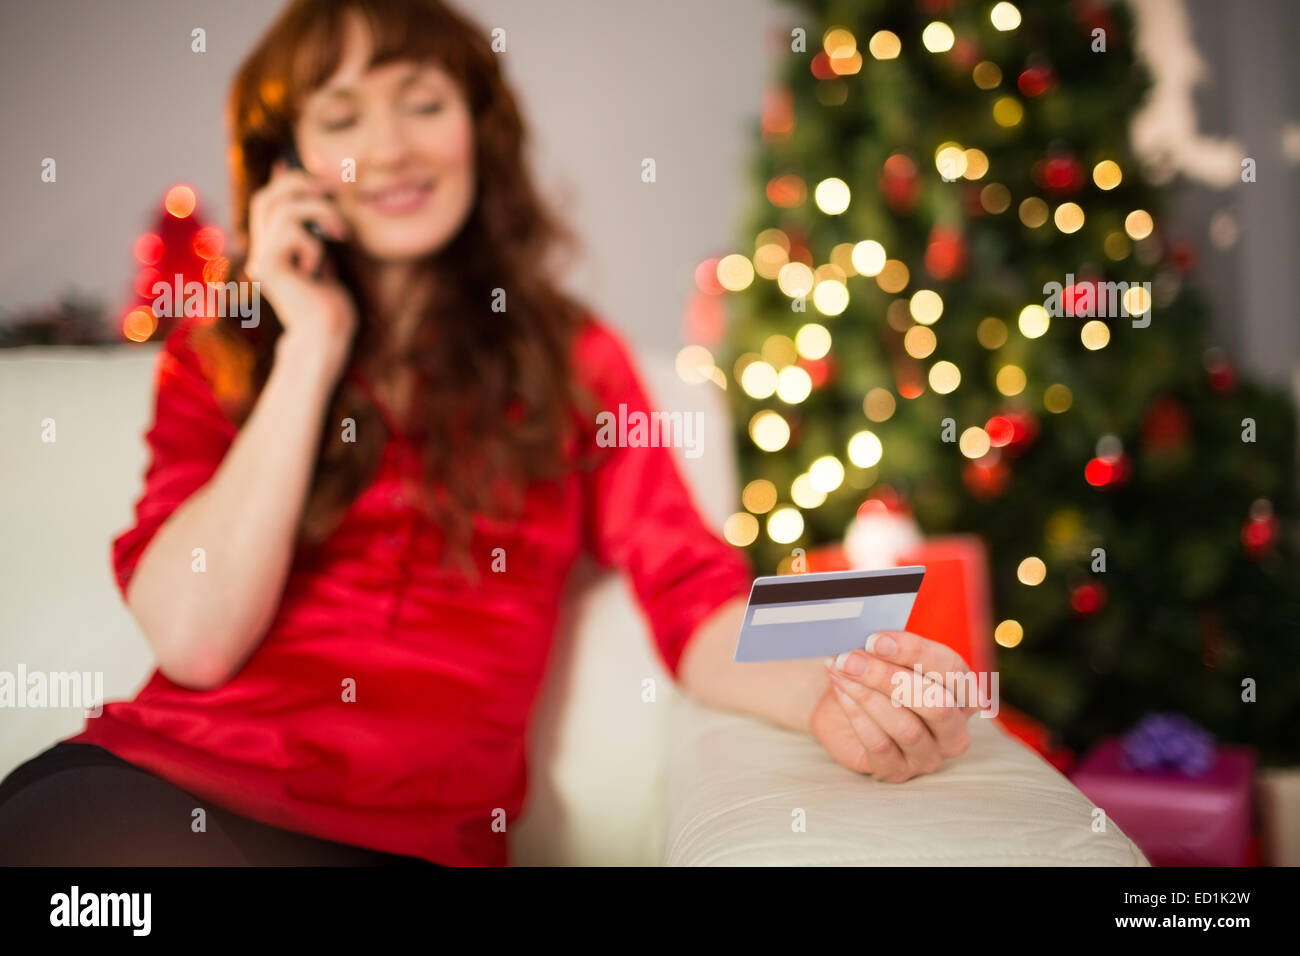 Smiling redhead phoning and holding credit card Stock Photo